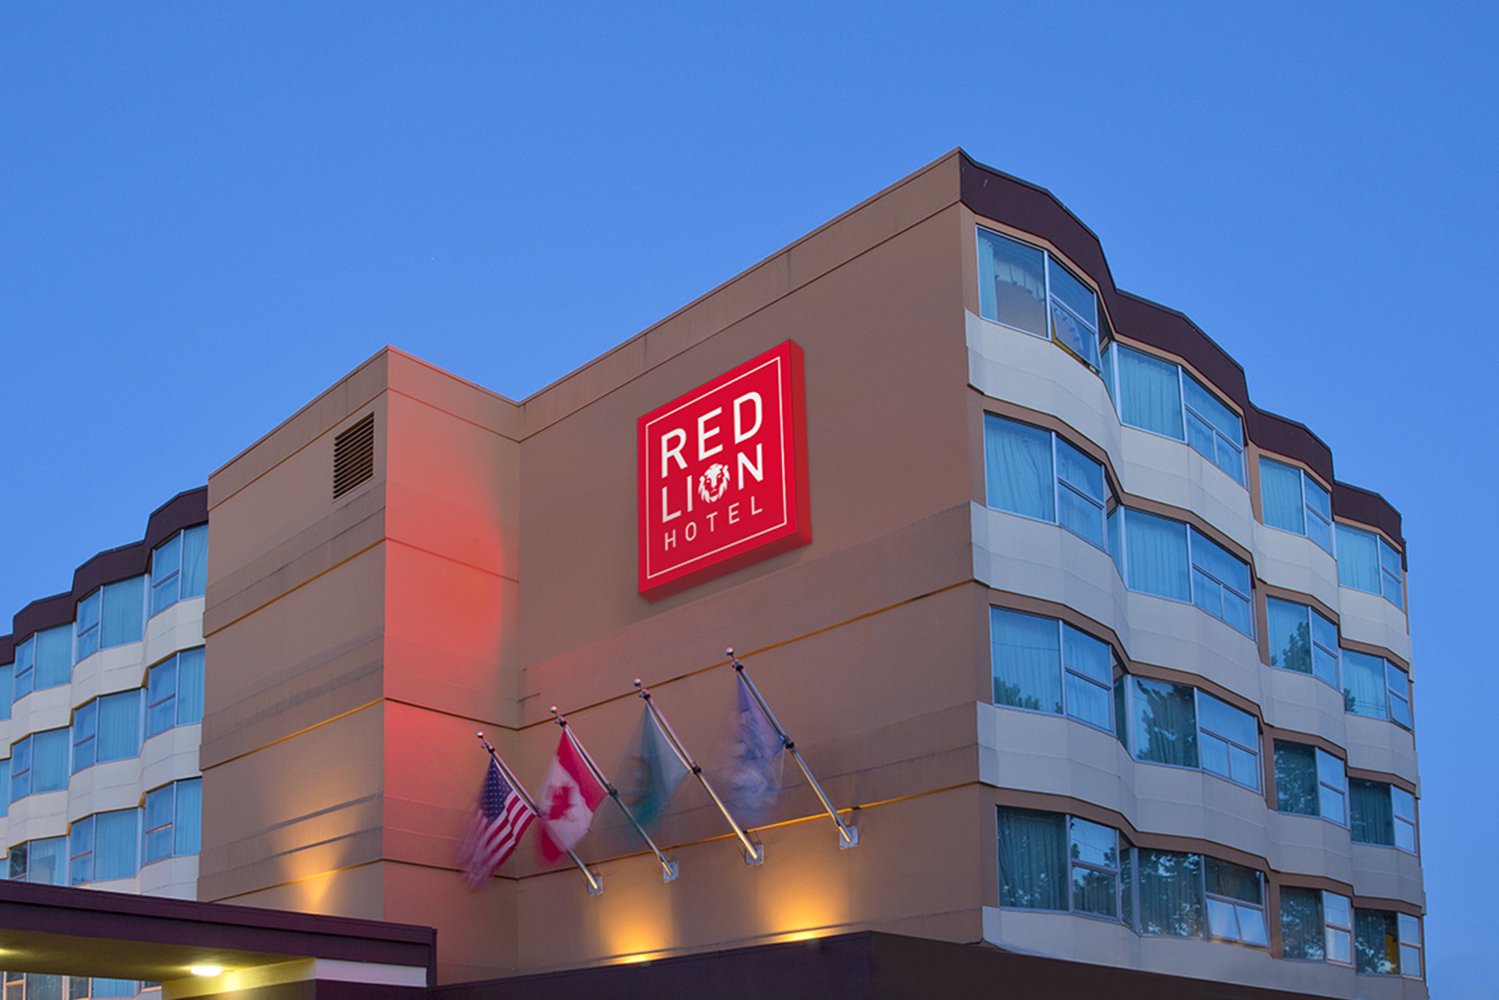 Red Lion Hotel Exterior banner